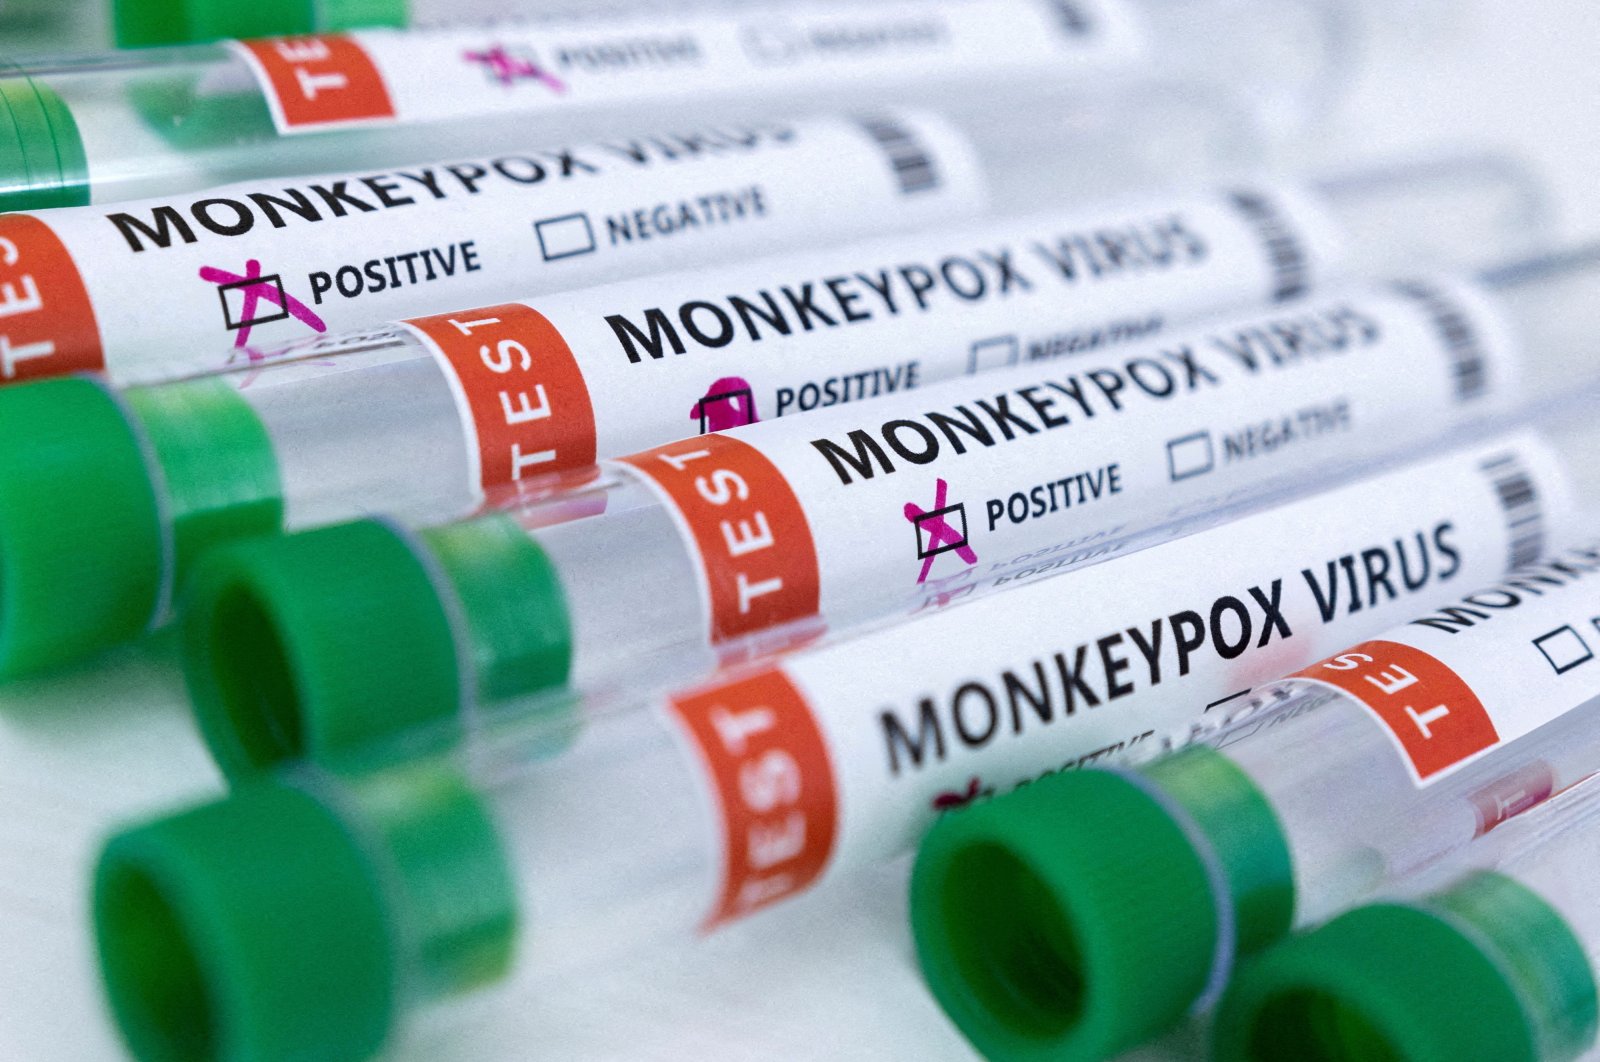 Test tubes labeled &quot;Monkeypox virus positive and negative&quot; are seen, India, May 23, 2022. (Reuters Photo)